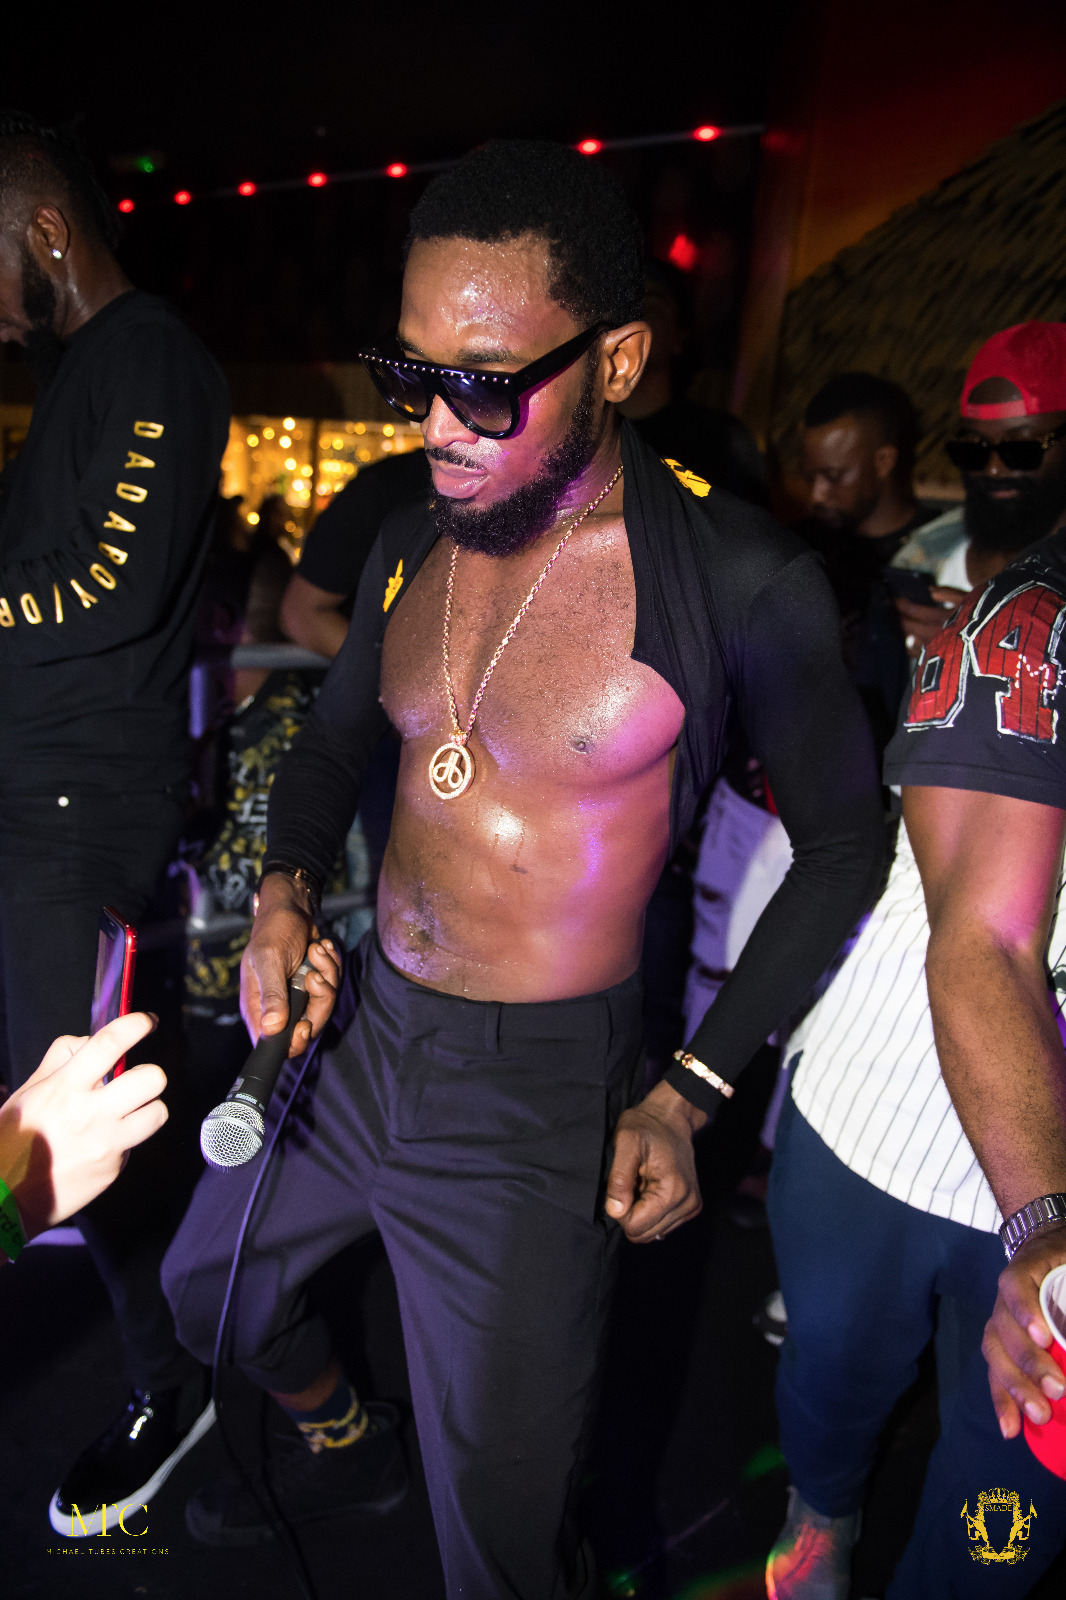 Koko Master!! D'banj IS Taking London By Storm Today, At The Koko Concert in 02 Academy UK.